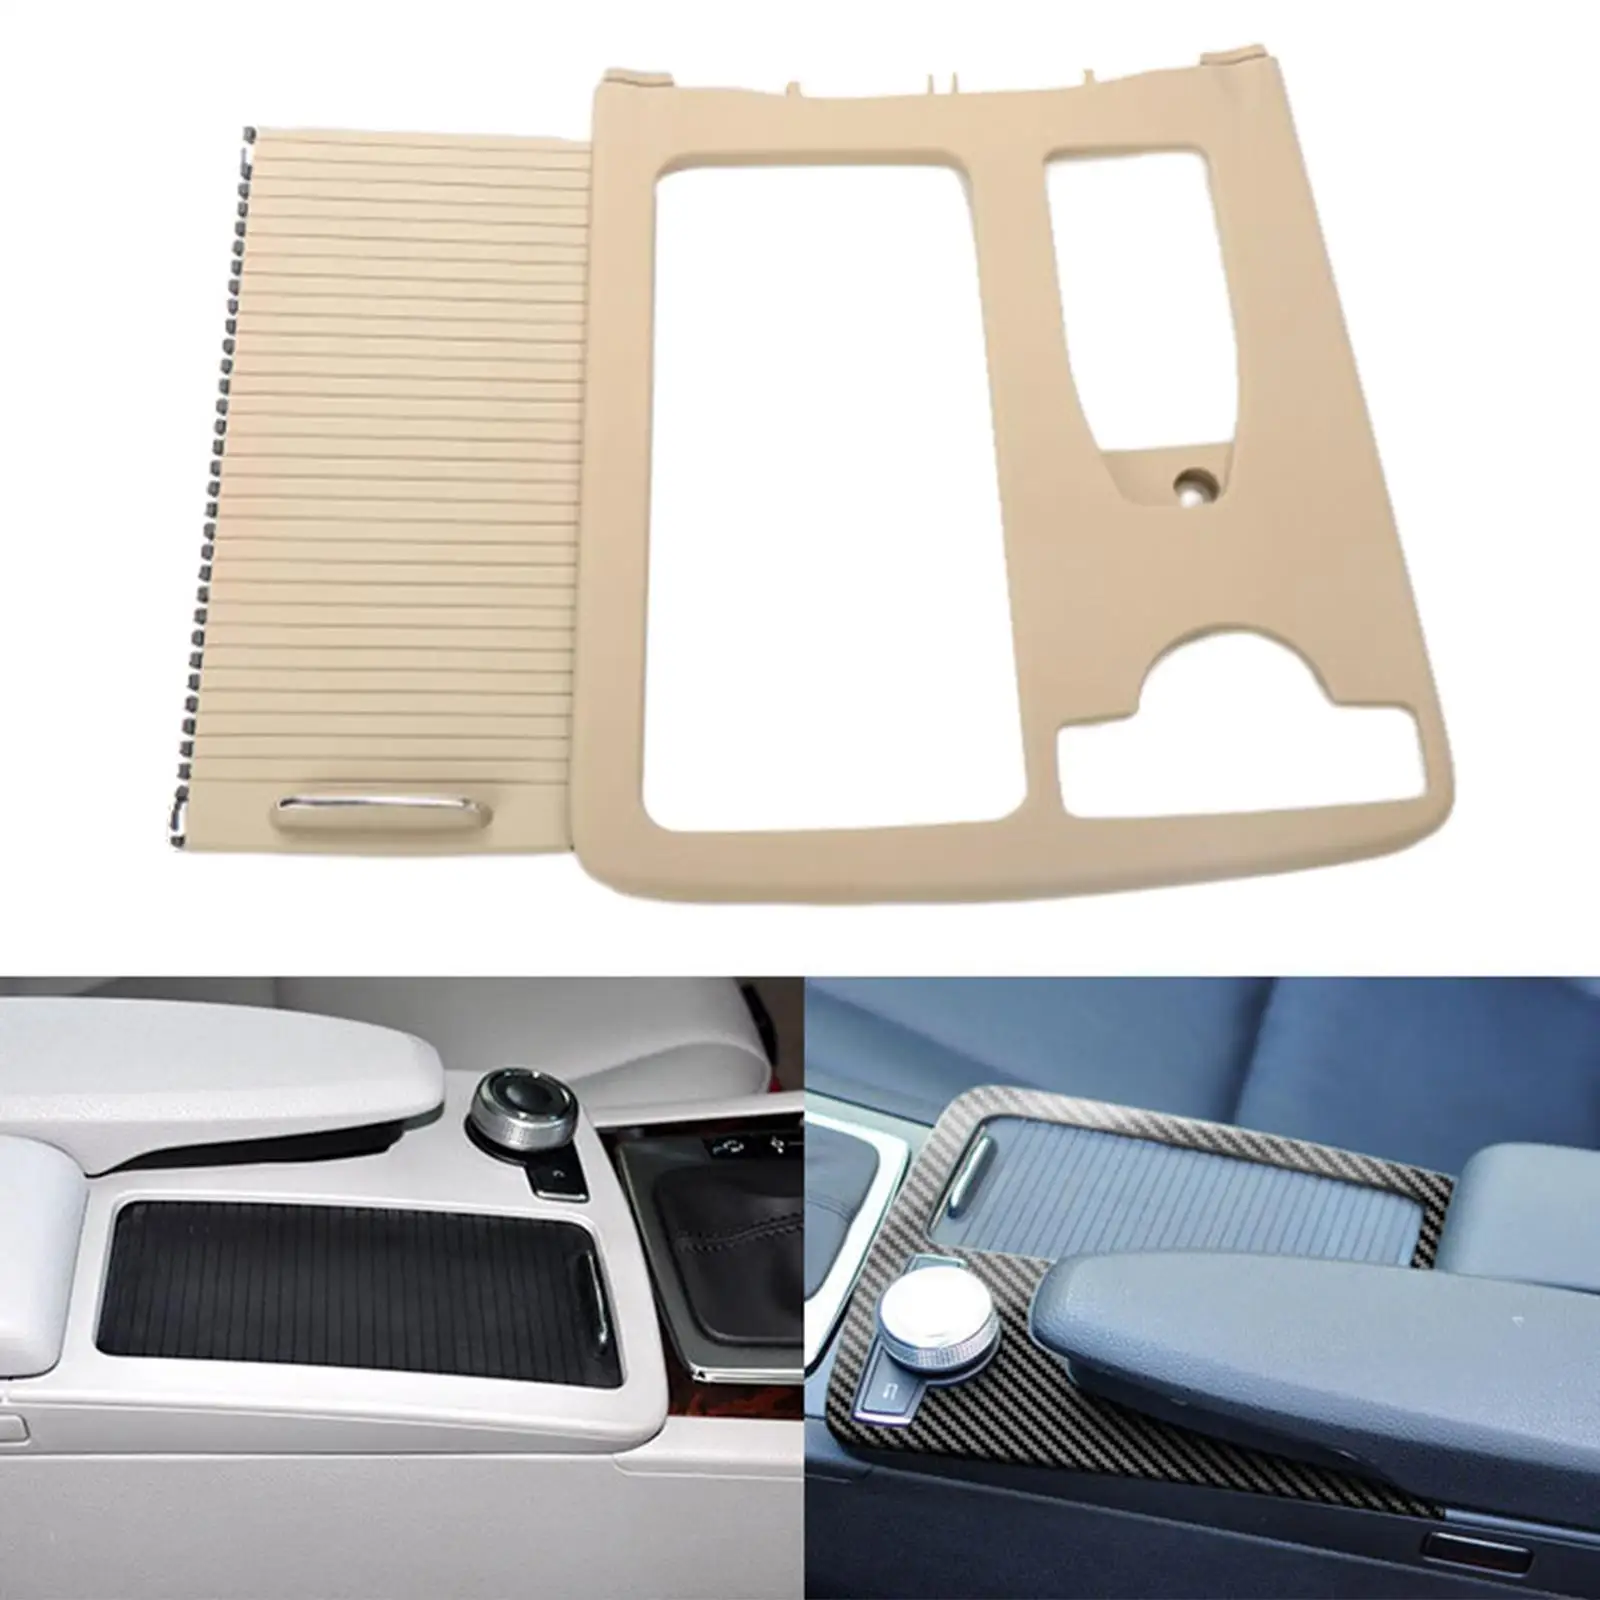 Drink Cup Holder Decorative Interior Car Styling Panel for C Class